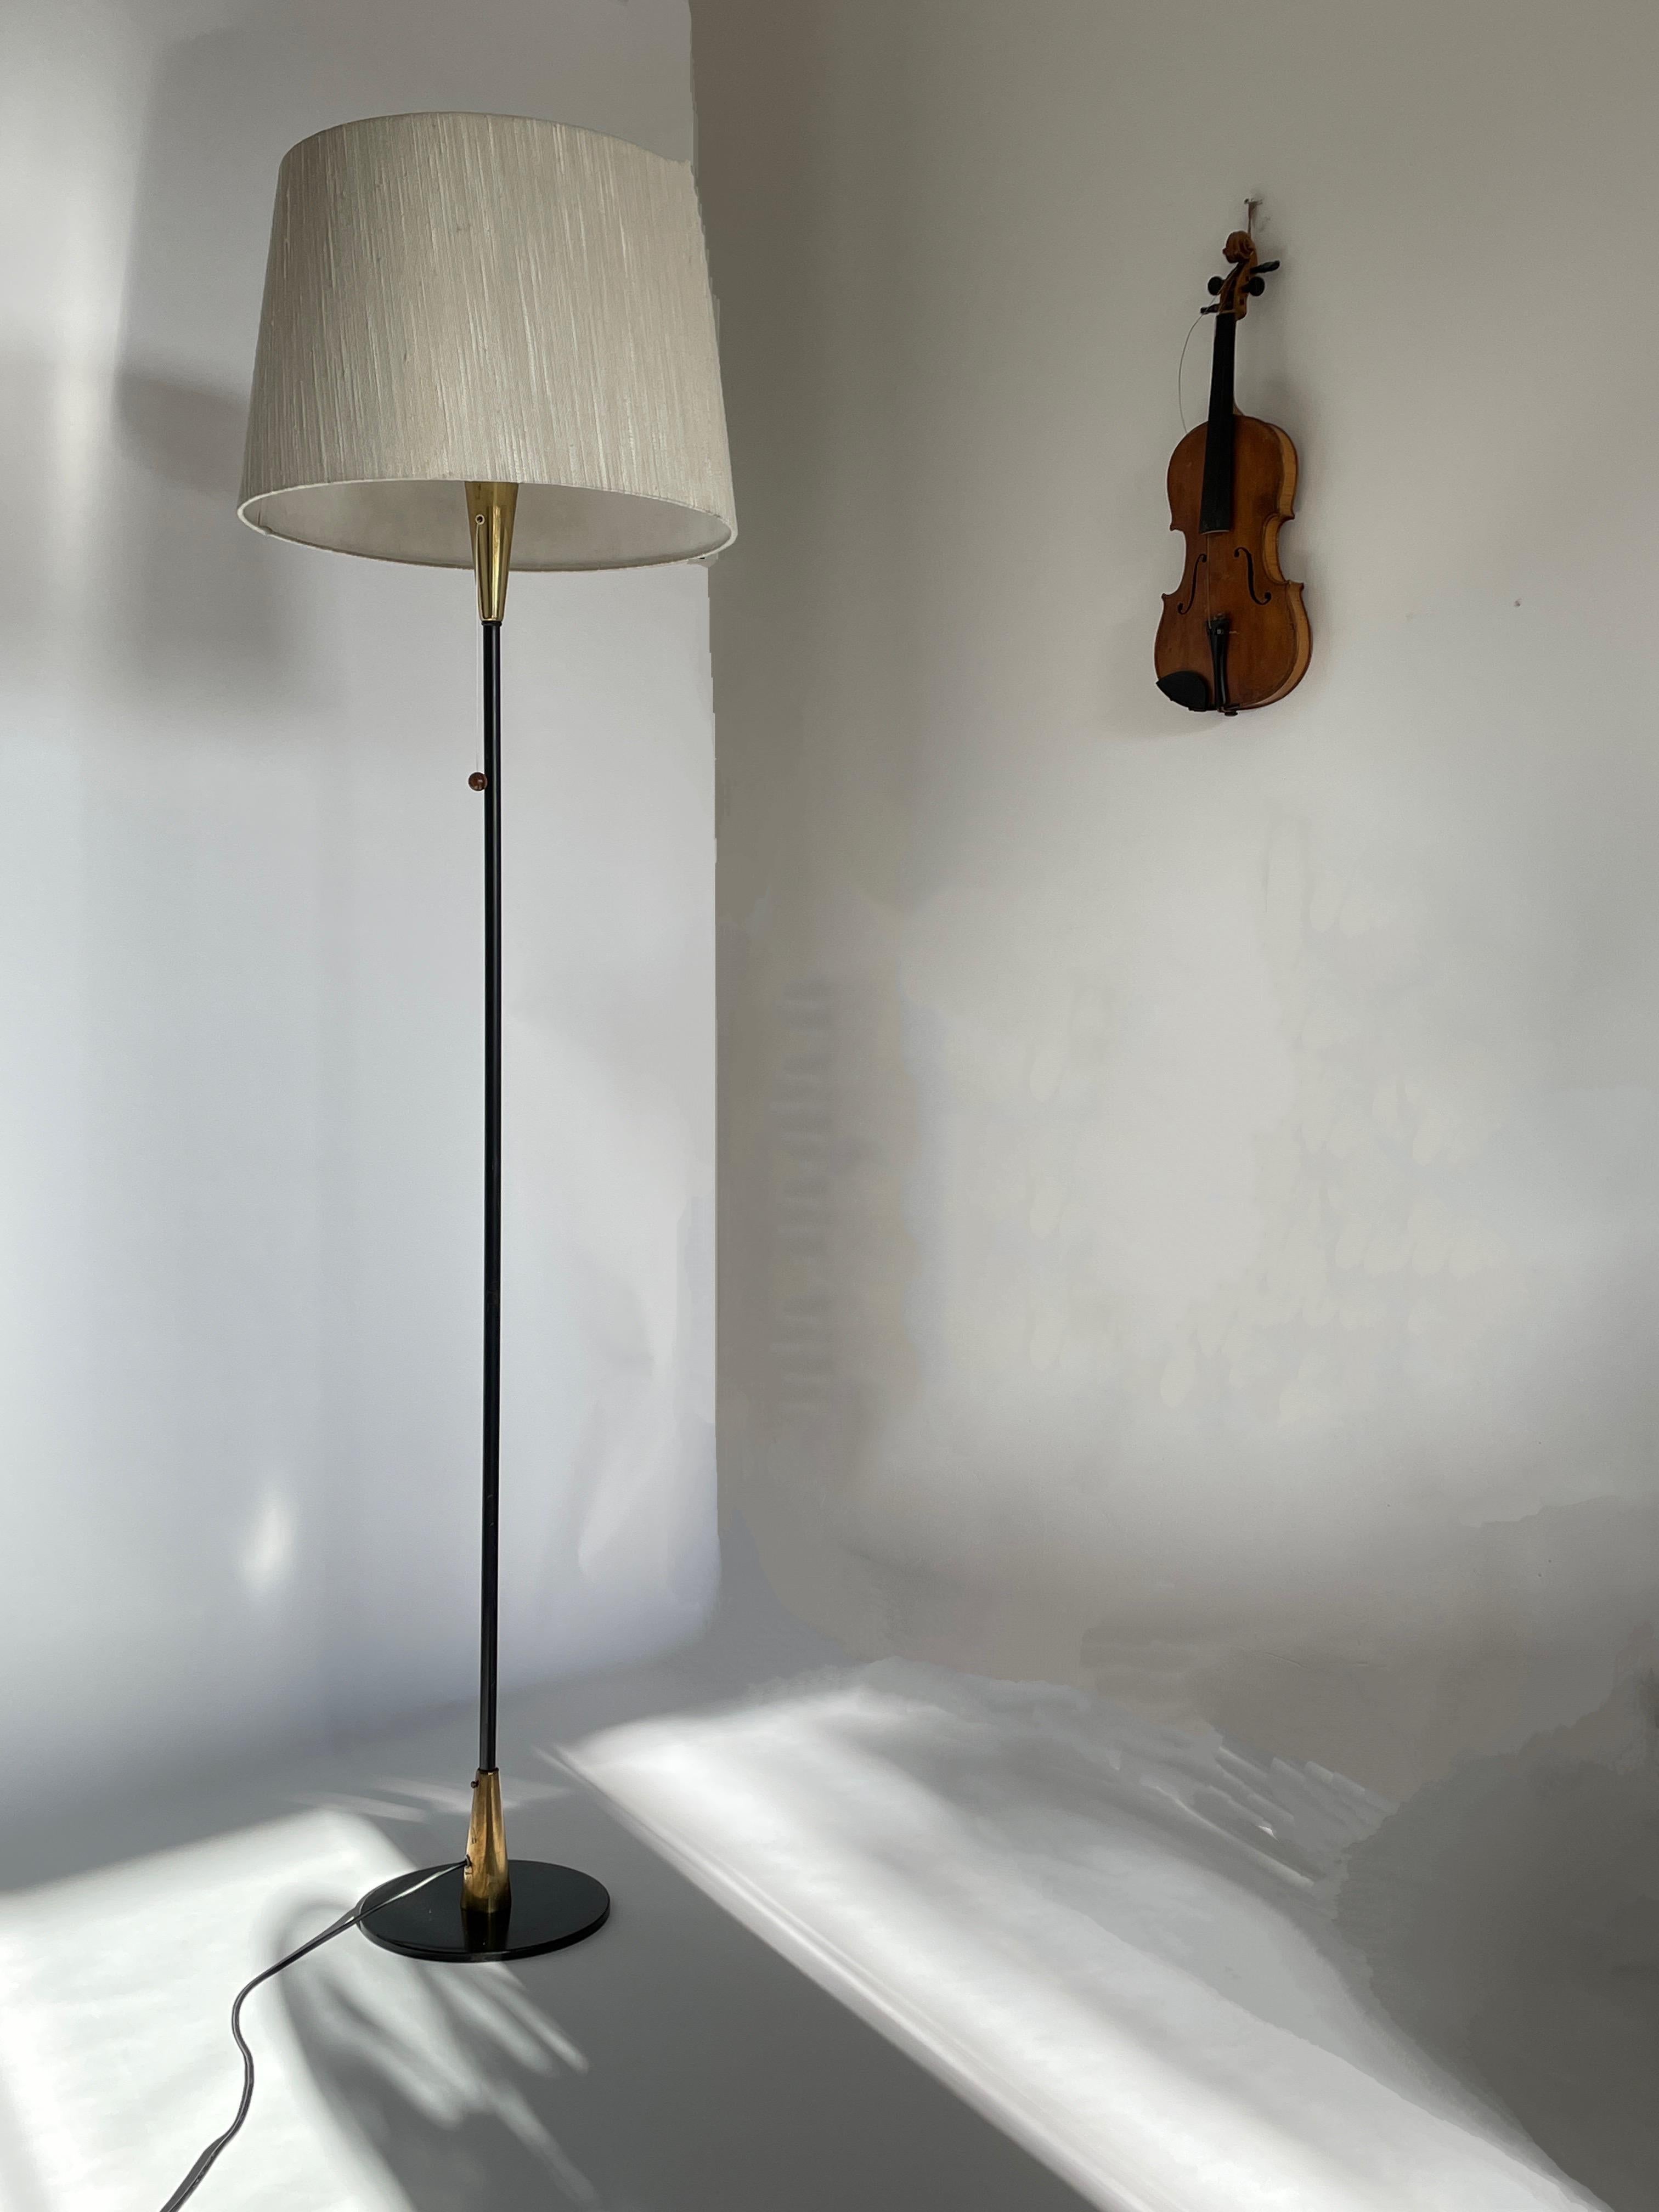 Fabric Mid-century Modern Floor Lamp by Maria Lindeman for Idman, Finland, 1950s For Sale